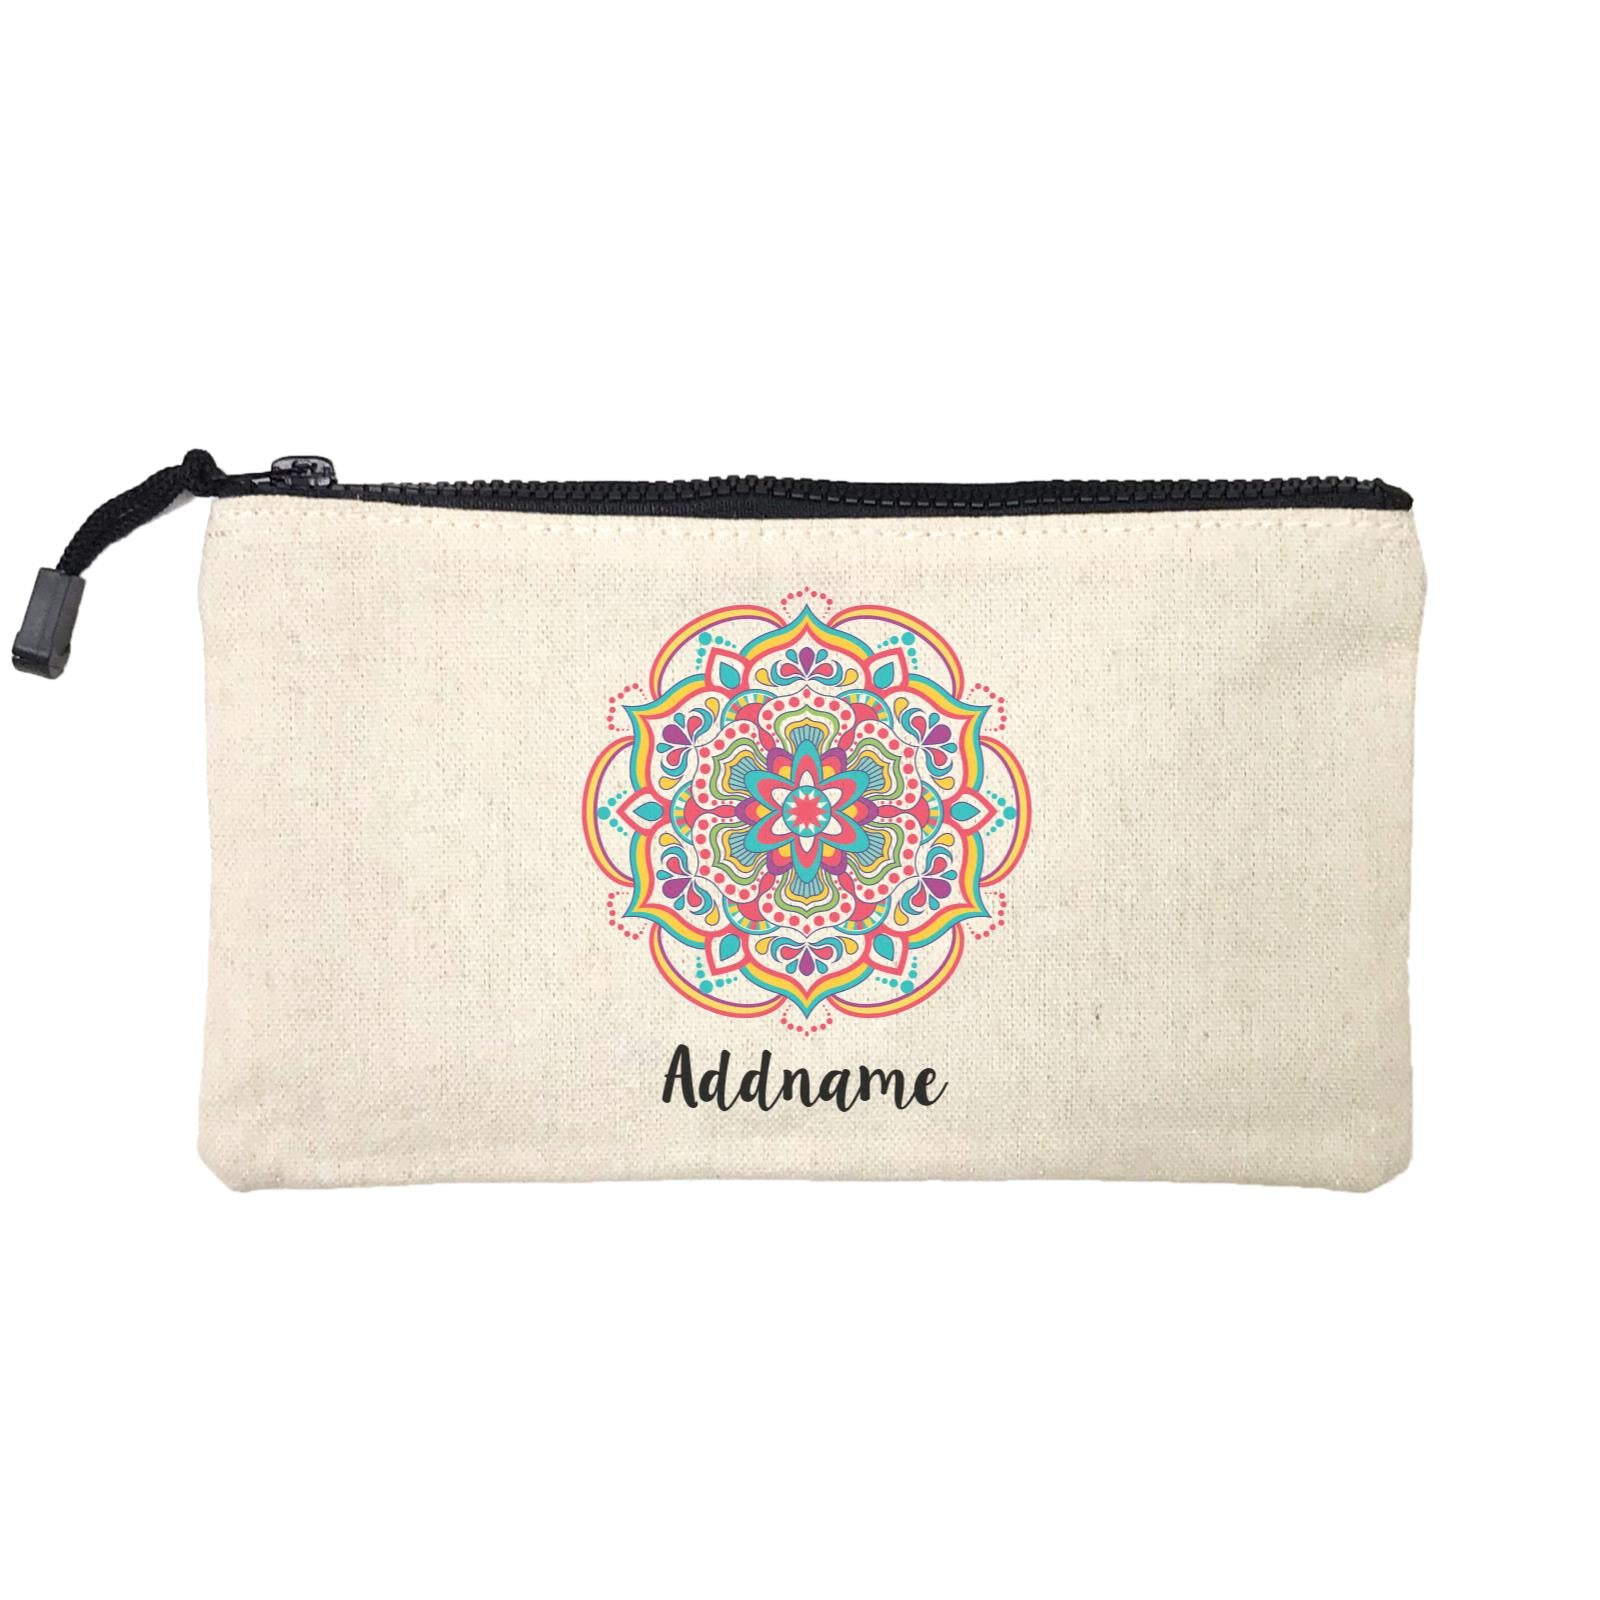 Deepavali Colourful Floral Mandala Addname Mini Accessories Stationery Pouch